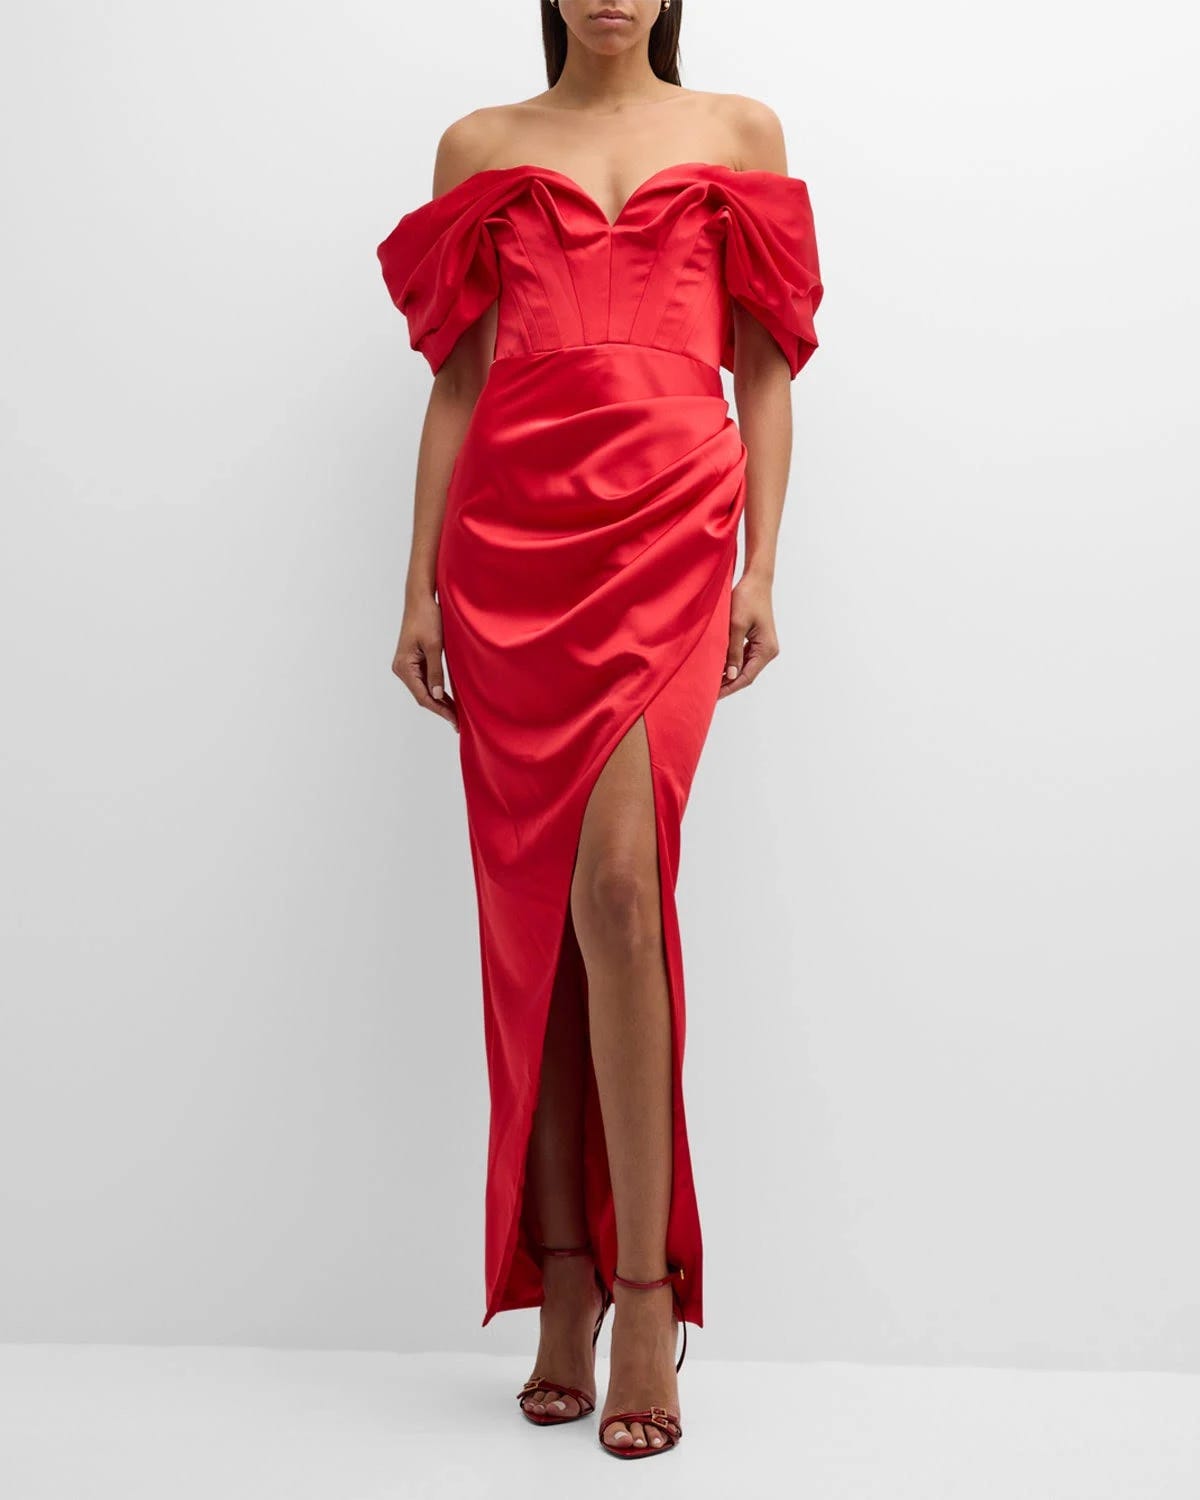 GIGII'S Stylish Off-Shoulder Draped Column Gown | Image